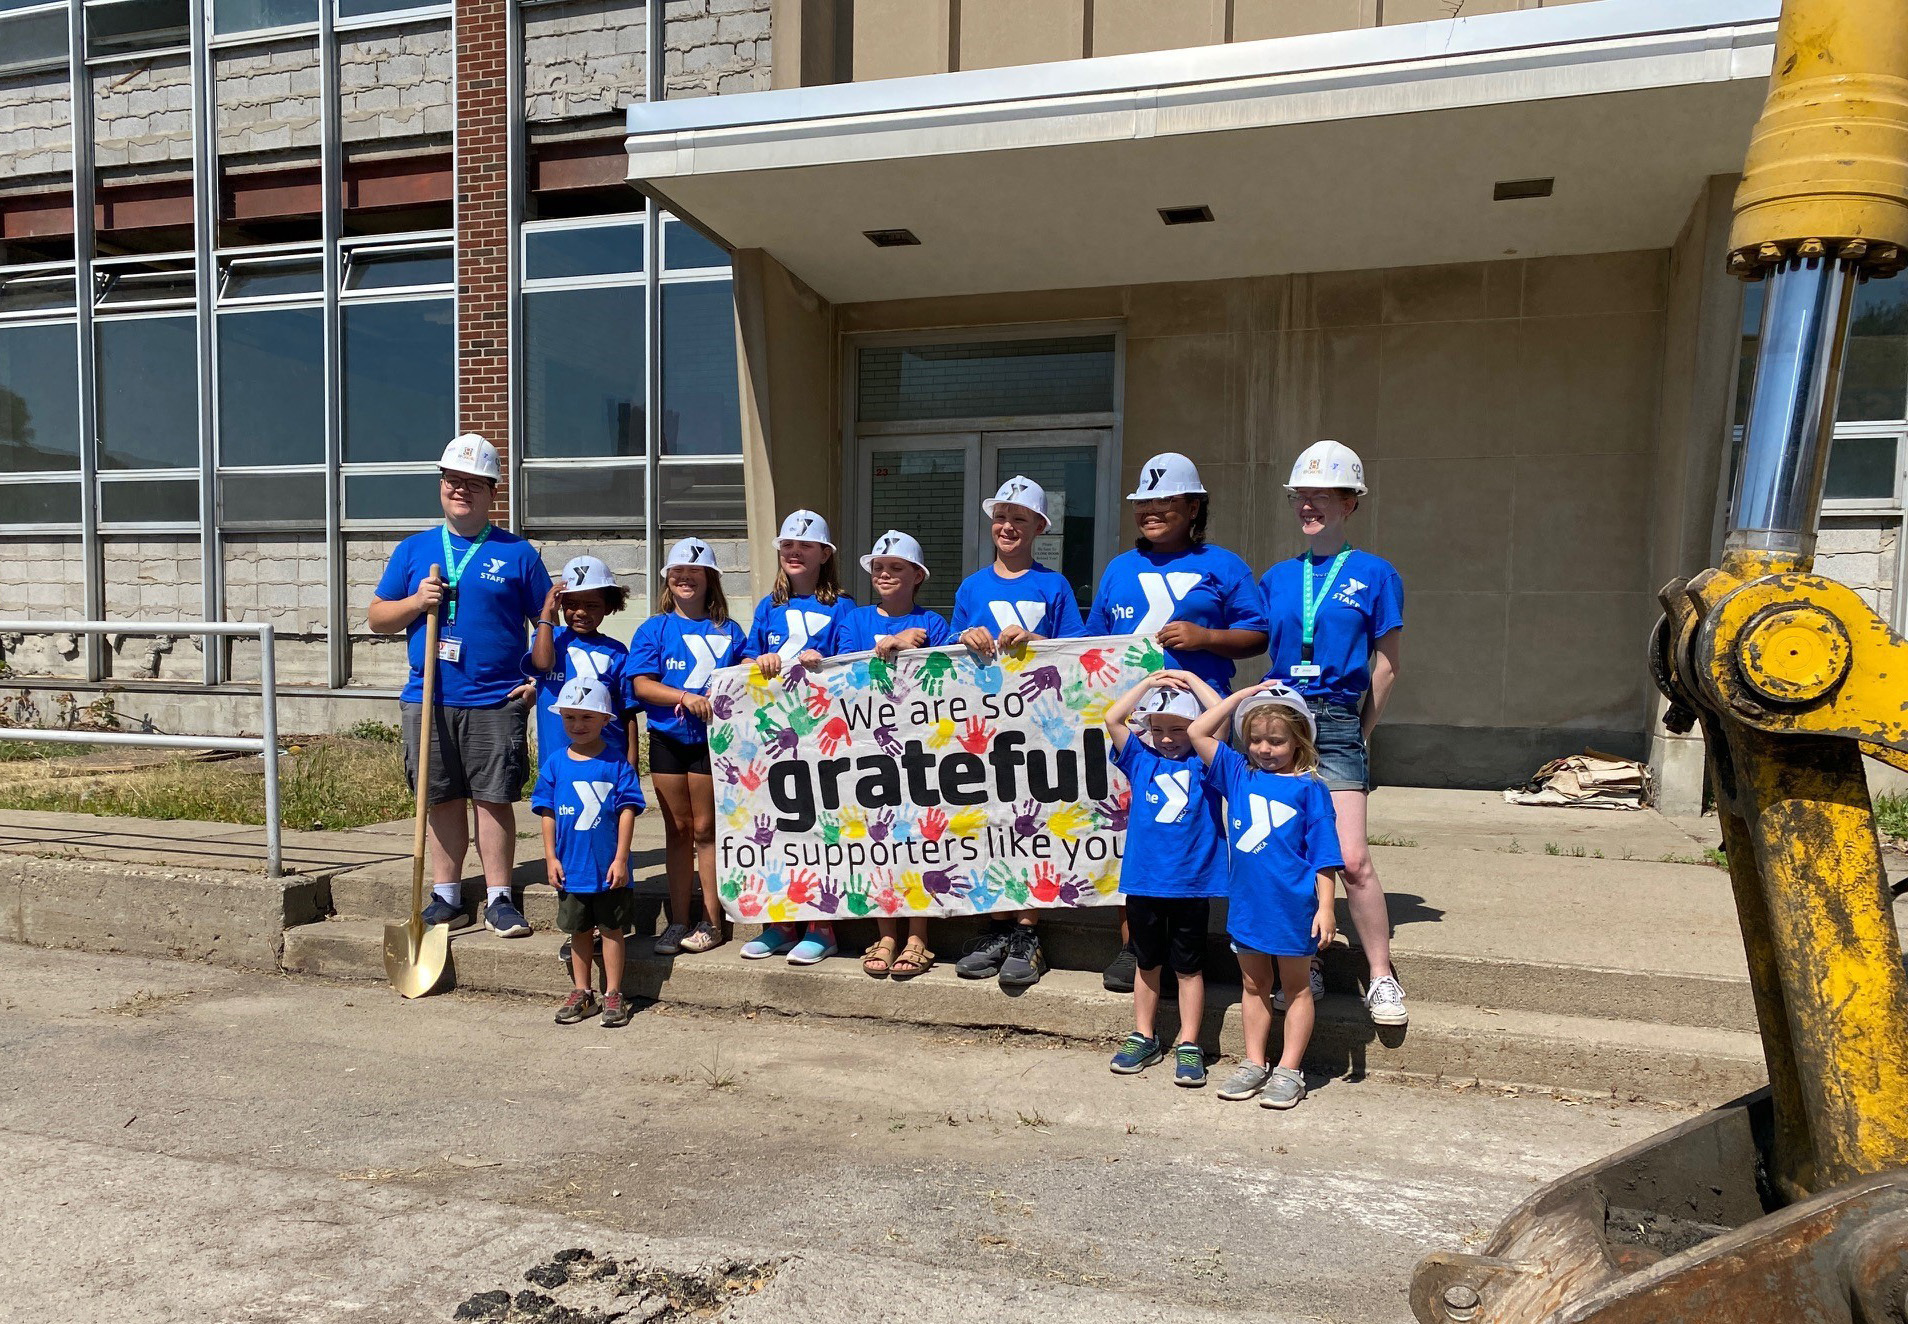 Image of children in hard hats holding a sign that says "We are so grateful for supporters like you"